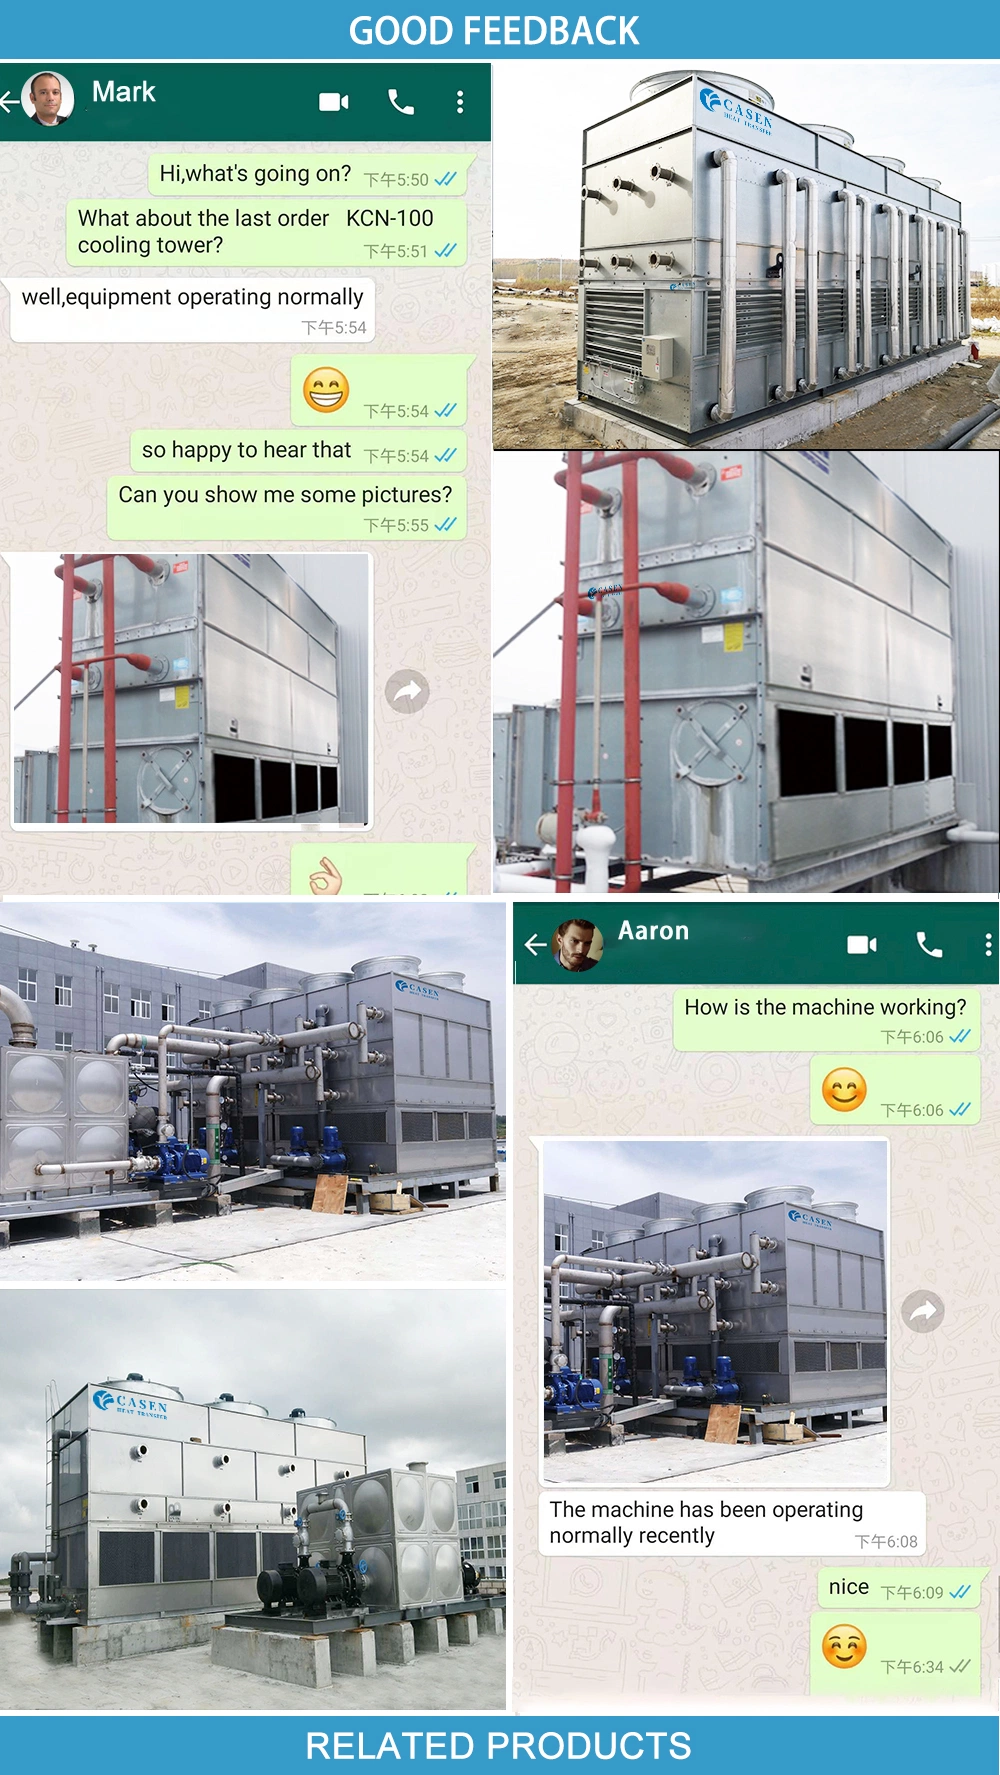 Best Quality Closed Cooling Tower Manufacturers Water Cooling Tower System for Cold Room